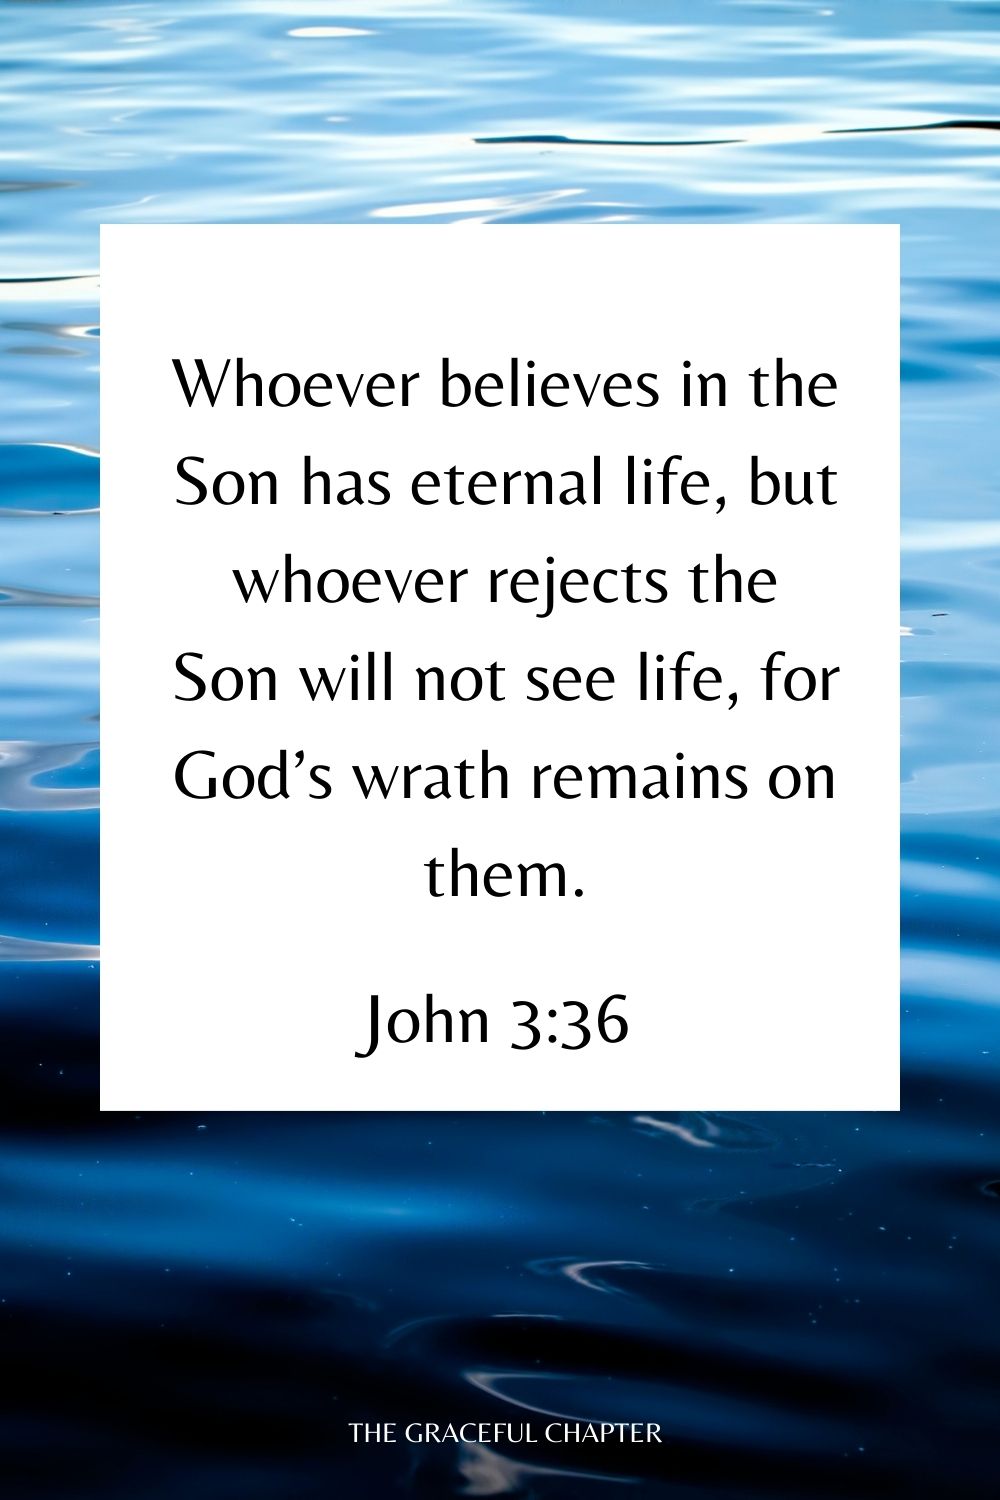 Whoever believes in the Son has eternal life, but whoever rejects the Son will not see life, for God’s wrath remains on them. John 3:36